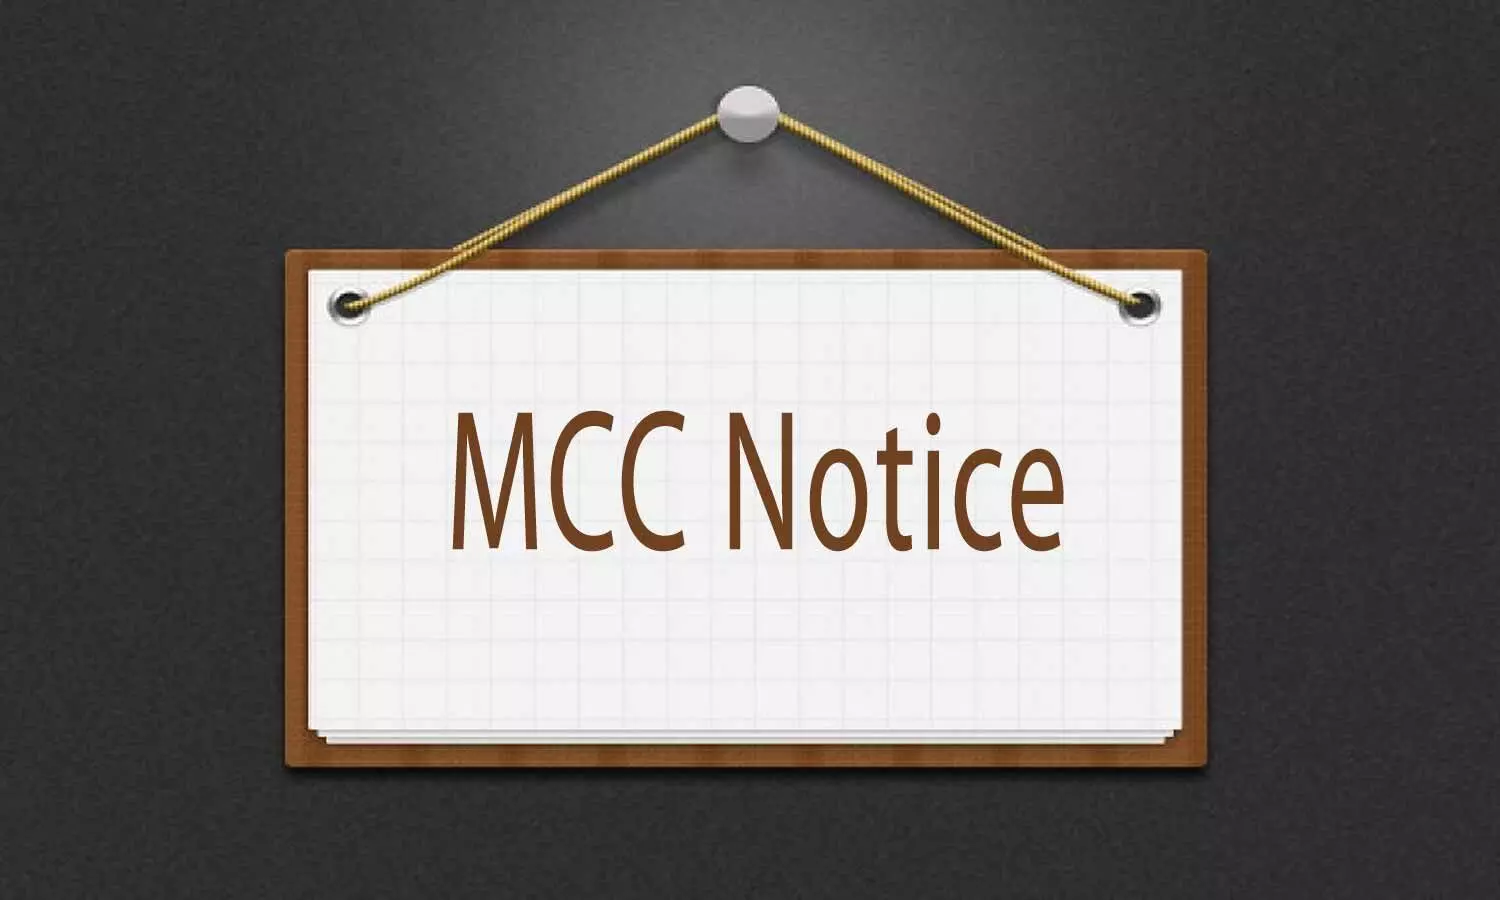 MCC reverts back RIMS Imphal PG Medical Seats to institute for Mop Up Counselling